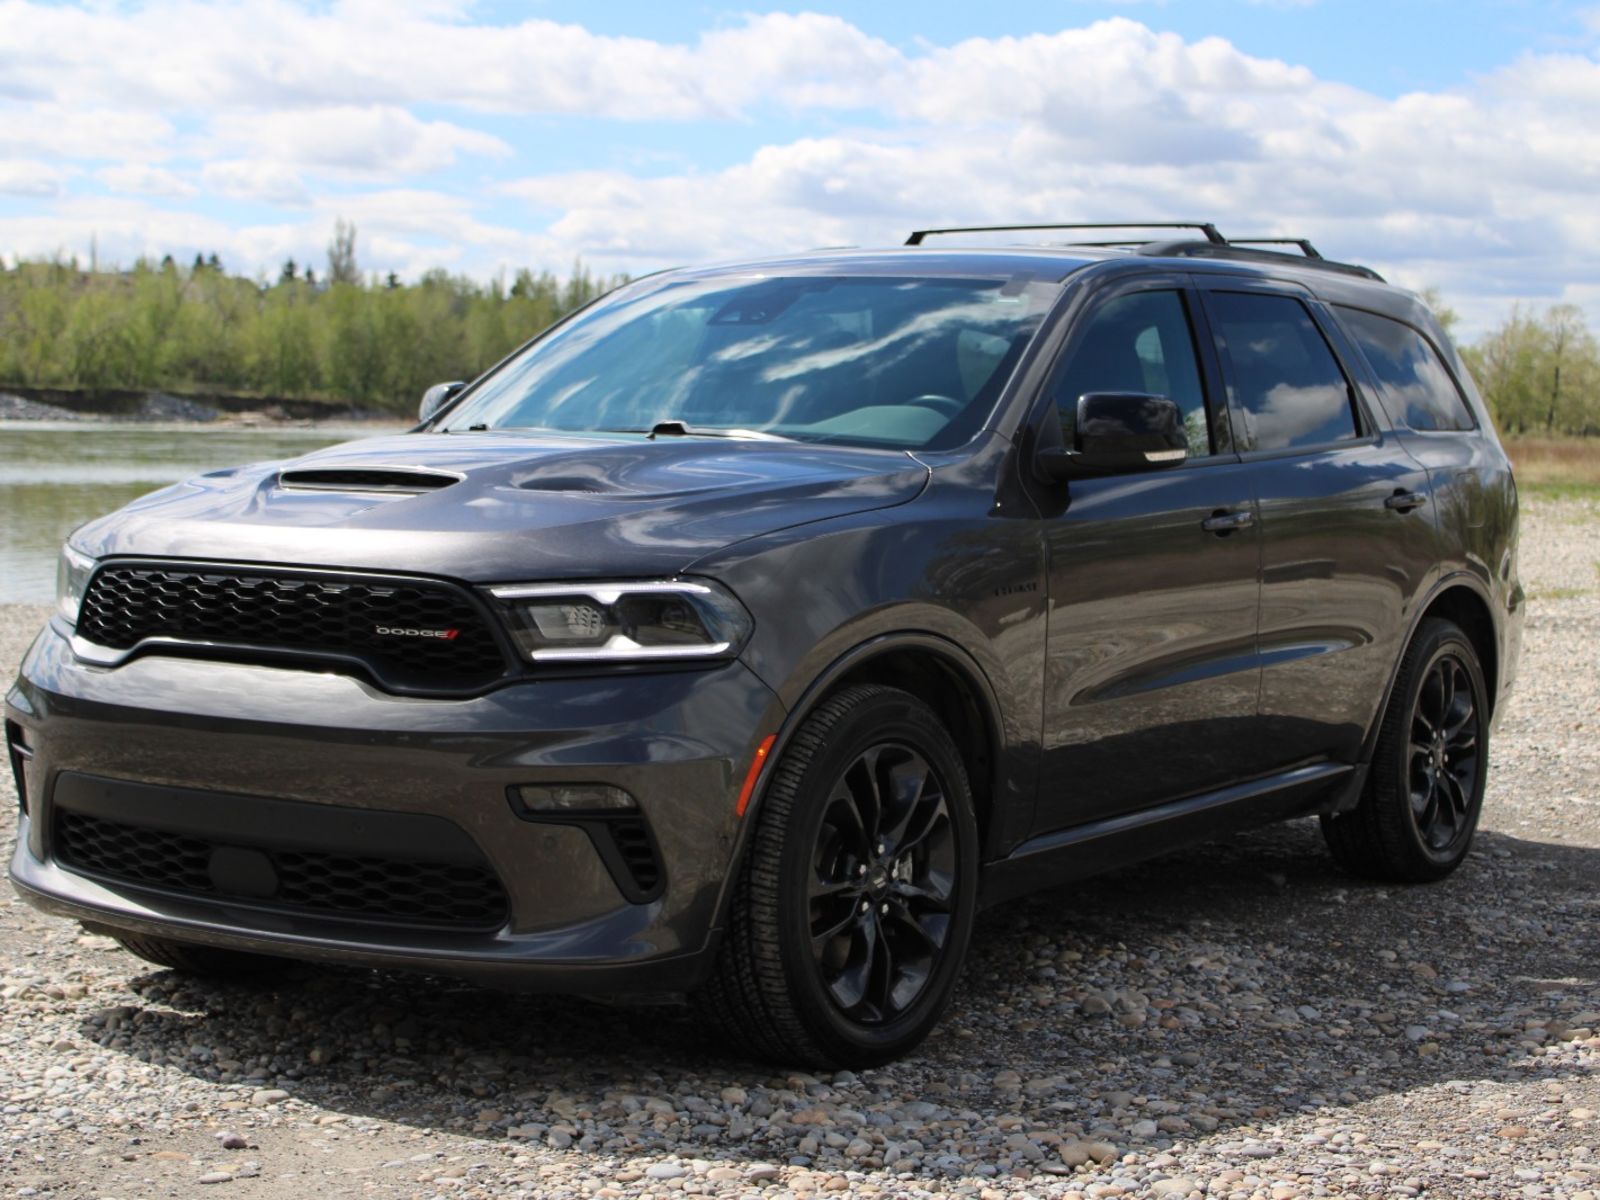 2021 Dodge Durango ONE OWNER - NEW FRONT BRAKES AND WINDSHIELD!